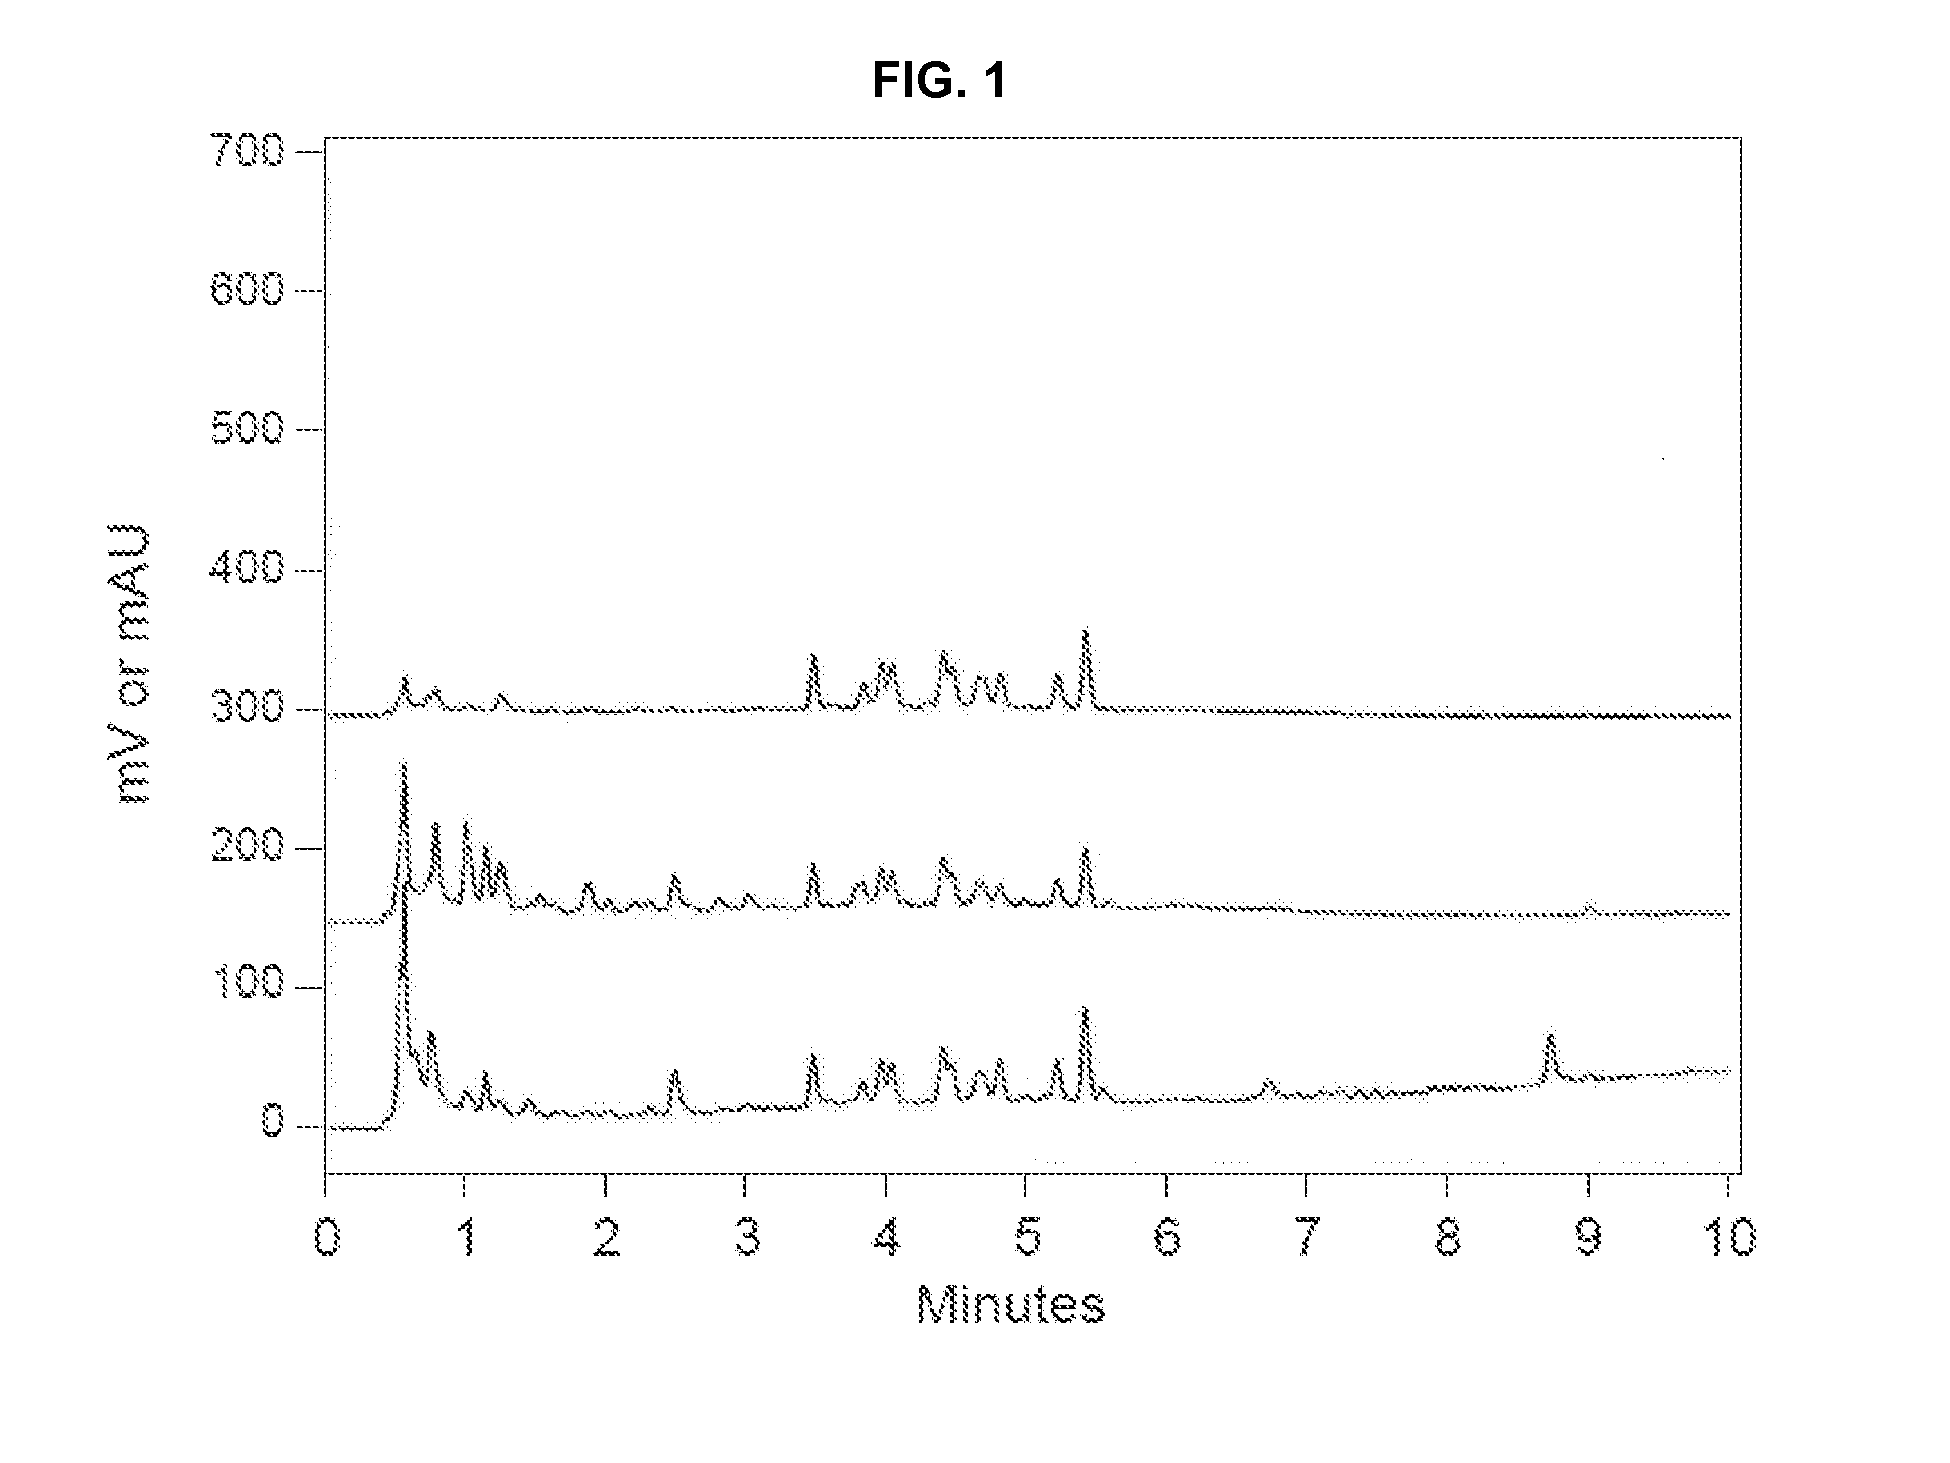 Use of Adipose Septa Protein Modulators and Compositions Thereof